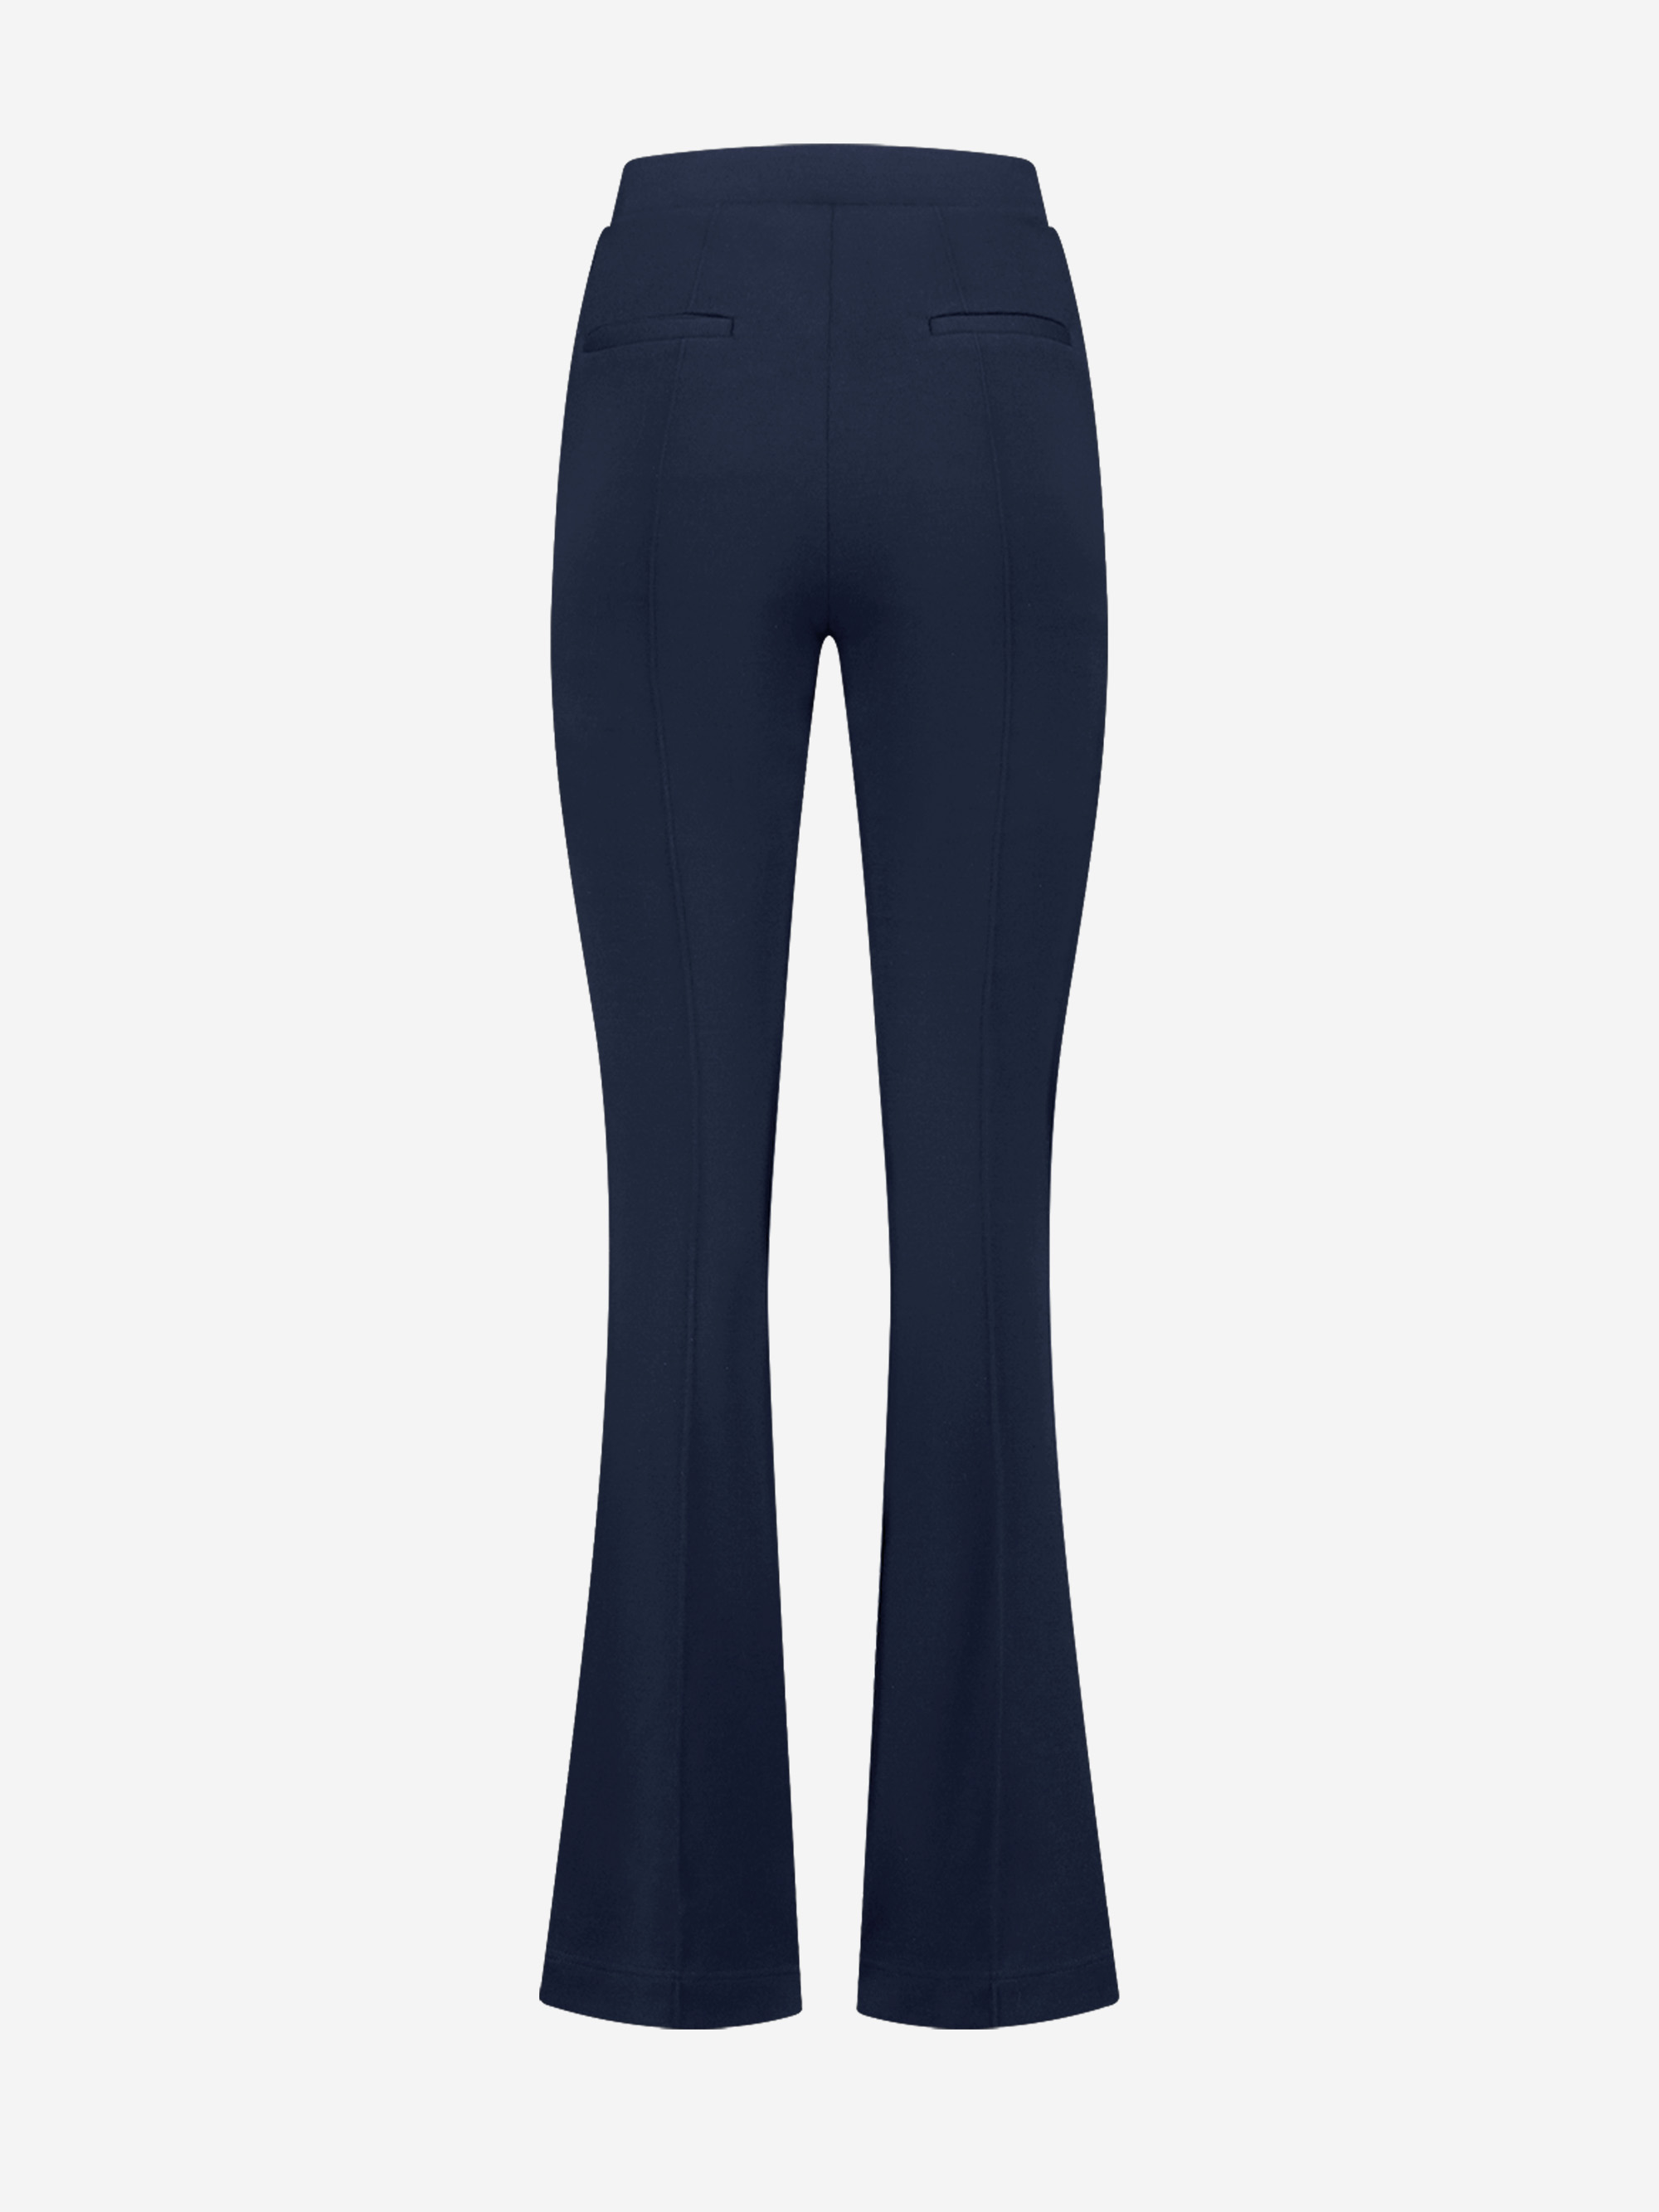 Fitted mid rise trousers